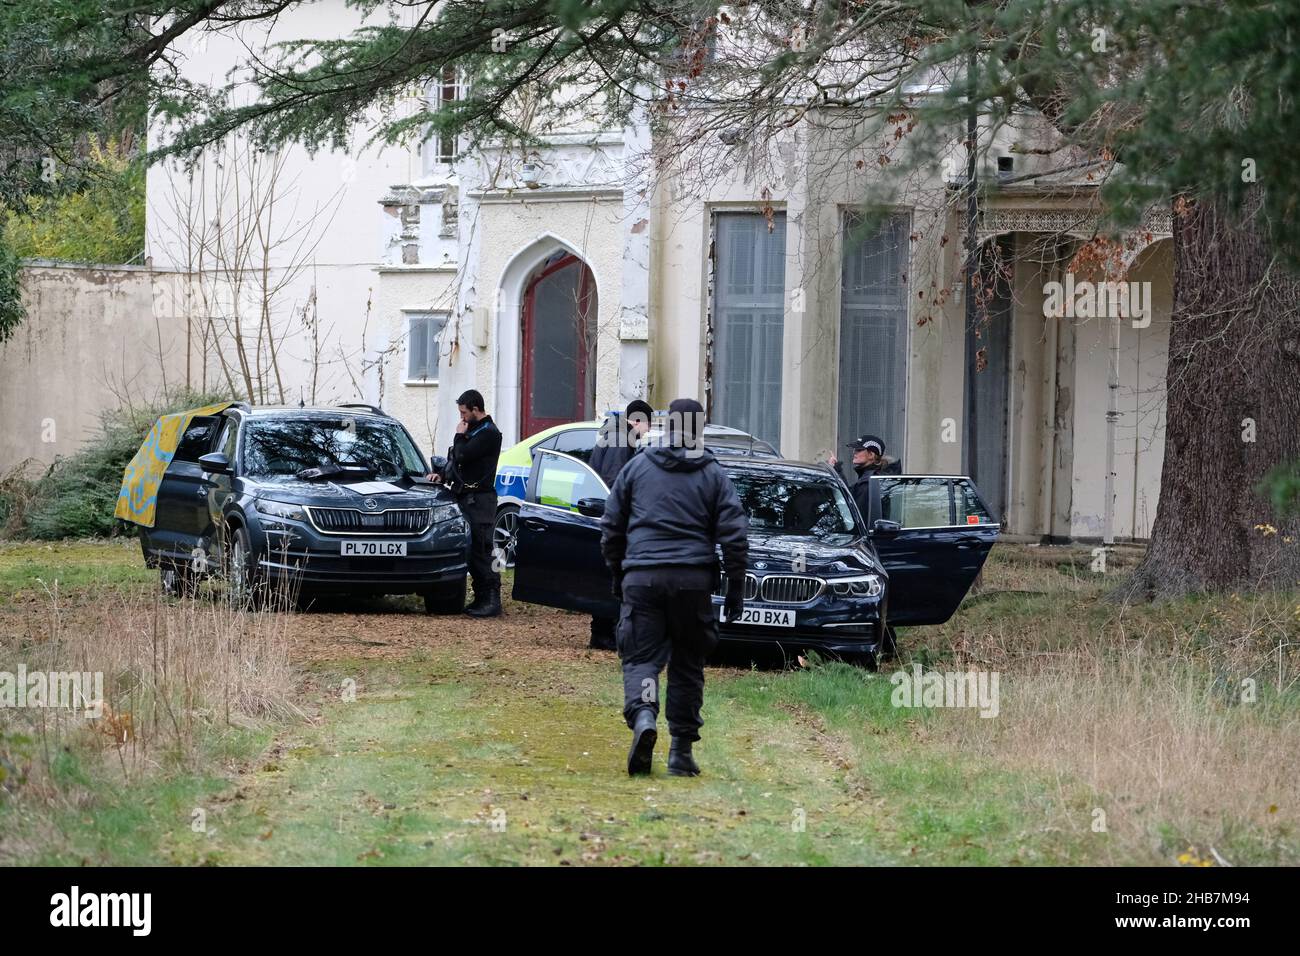 Hereford, Herefordshire, UK - Friday 17th December 2021 - Police officers search an empty property in the Venns Lane area of Hereford as part of their enquiry into missing person Janet Edwards - the 66 year old former nurse was last seen one week ago in Hereford on Friday 10th December 2021 - Photo Steven May / Alamy Live News Stock Photo